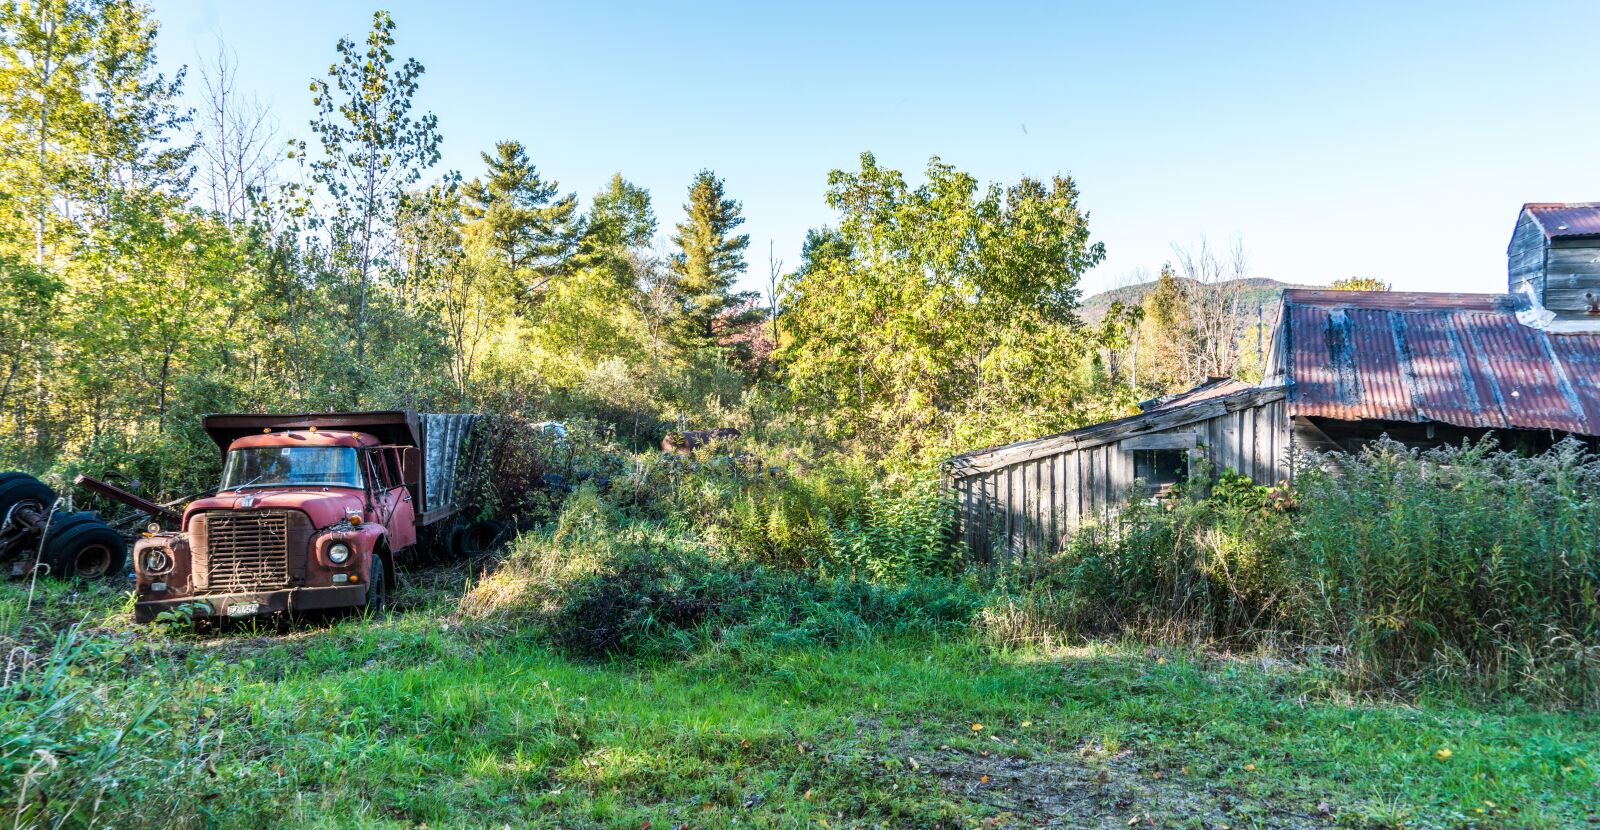 Sony a7R II sample photo. Sugar shack, antique truck photography